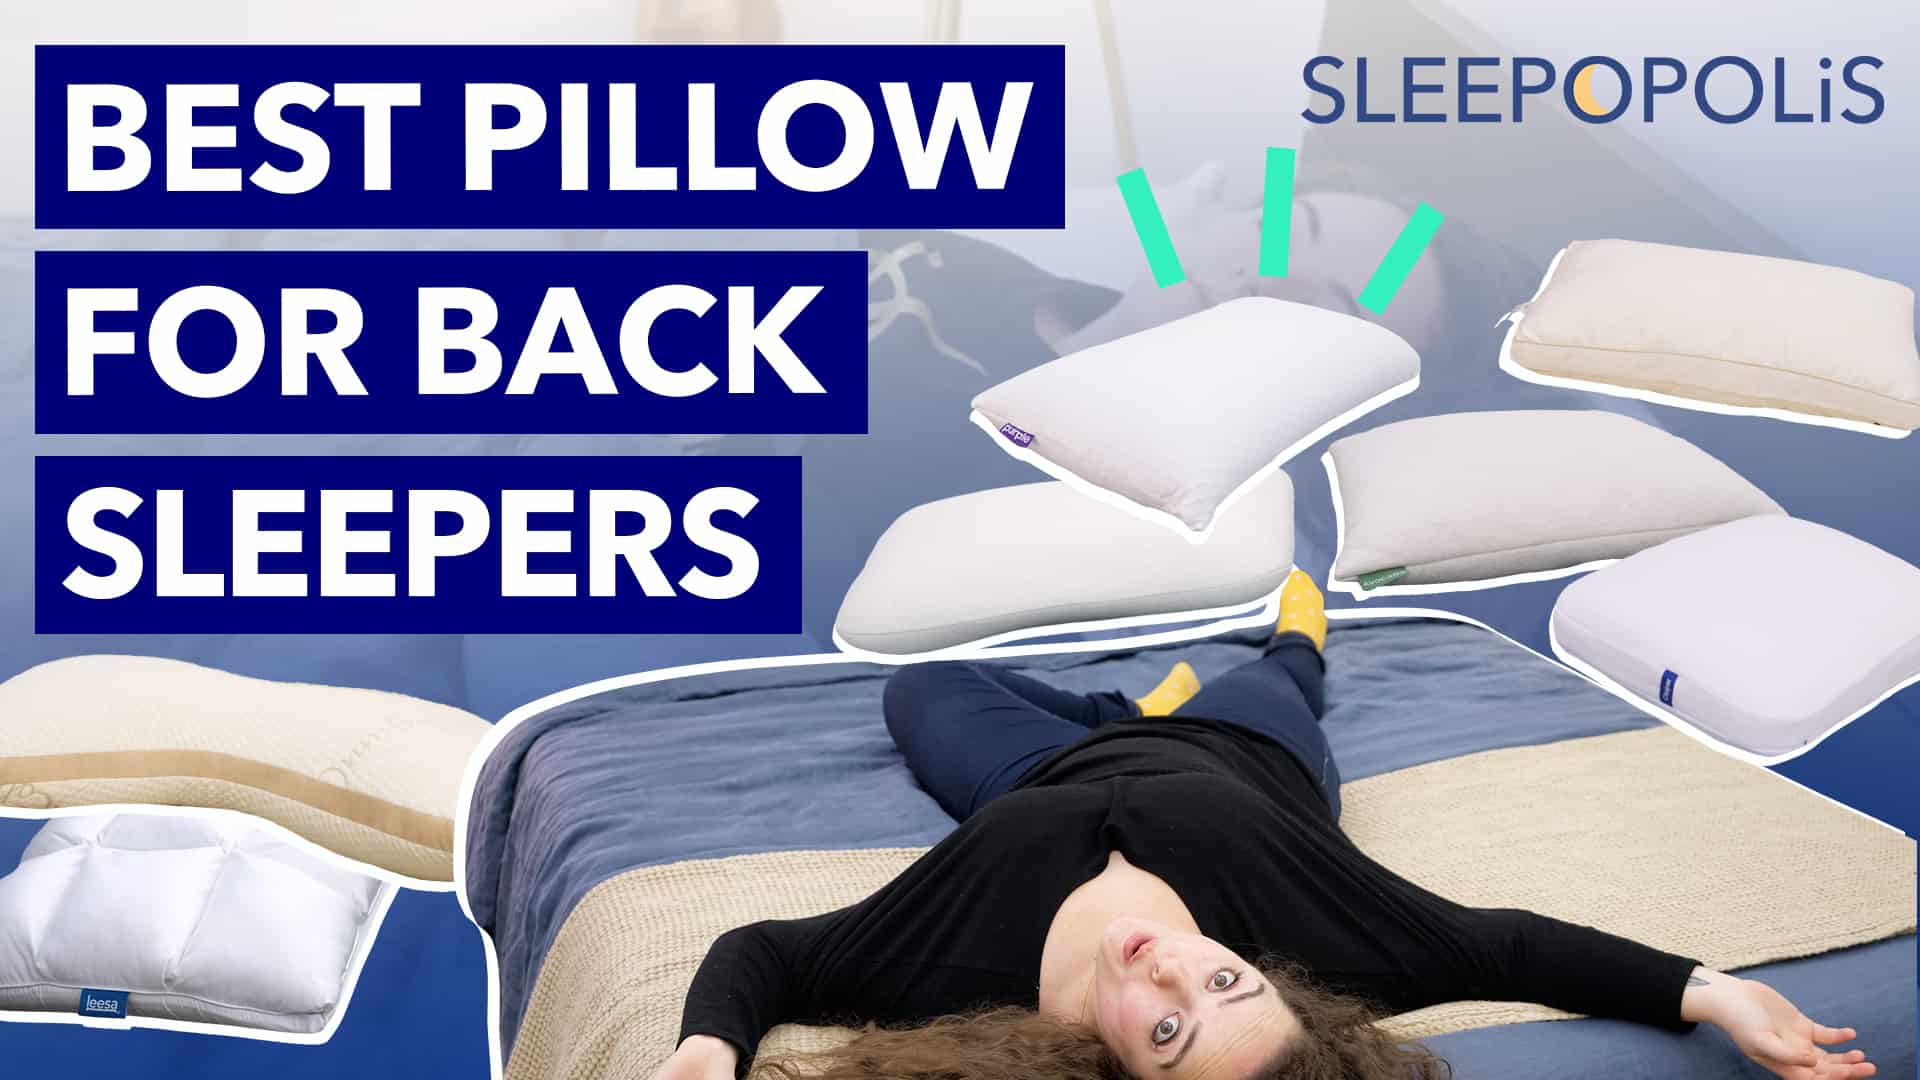 Best Pillow for Back Sleepers (2020 